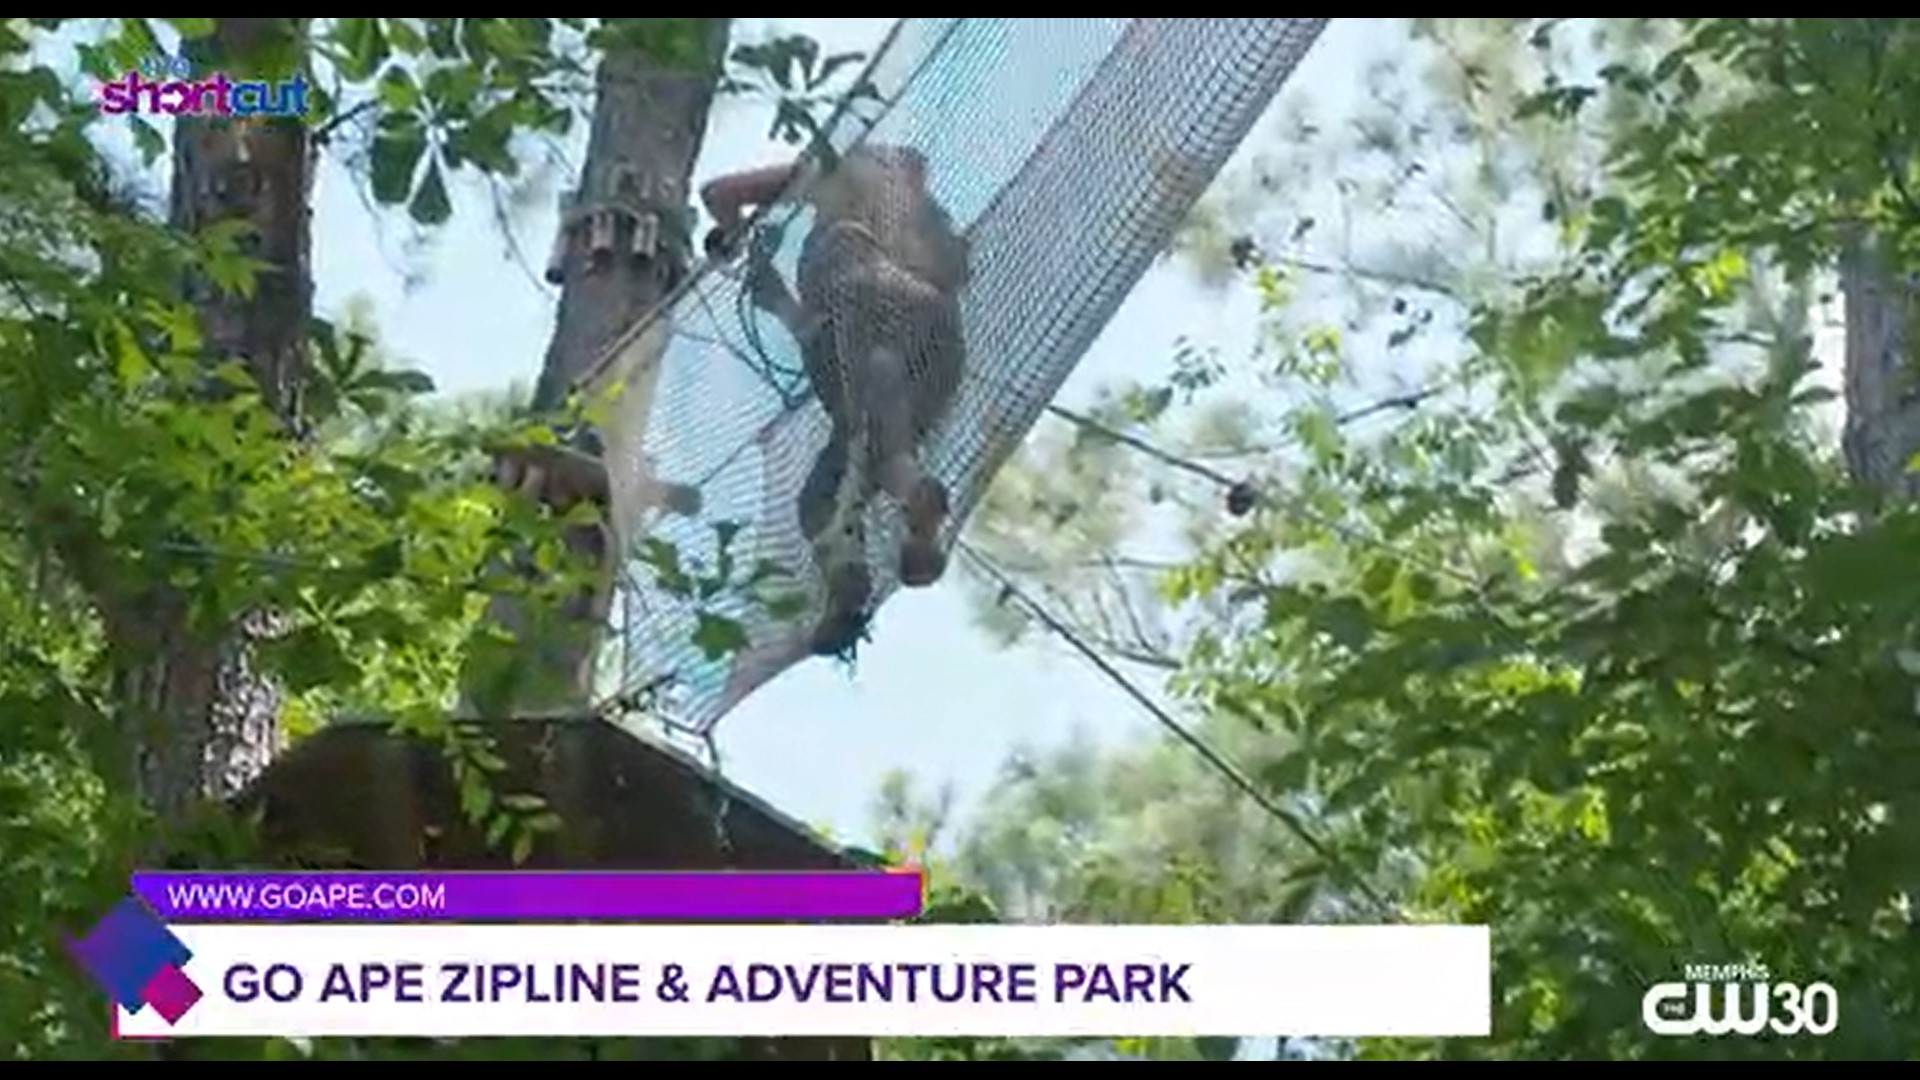 Whether you're into climbing or something else, check out what Memphis has to offer for the outdoor adventurous types at Go Ape Park in this week's "The Shortcut!"